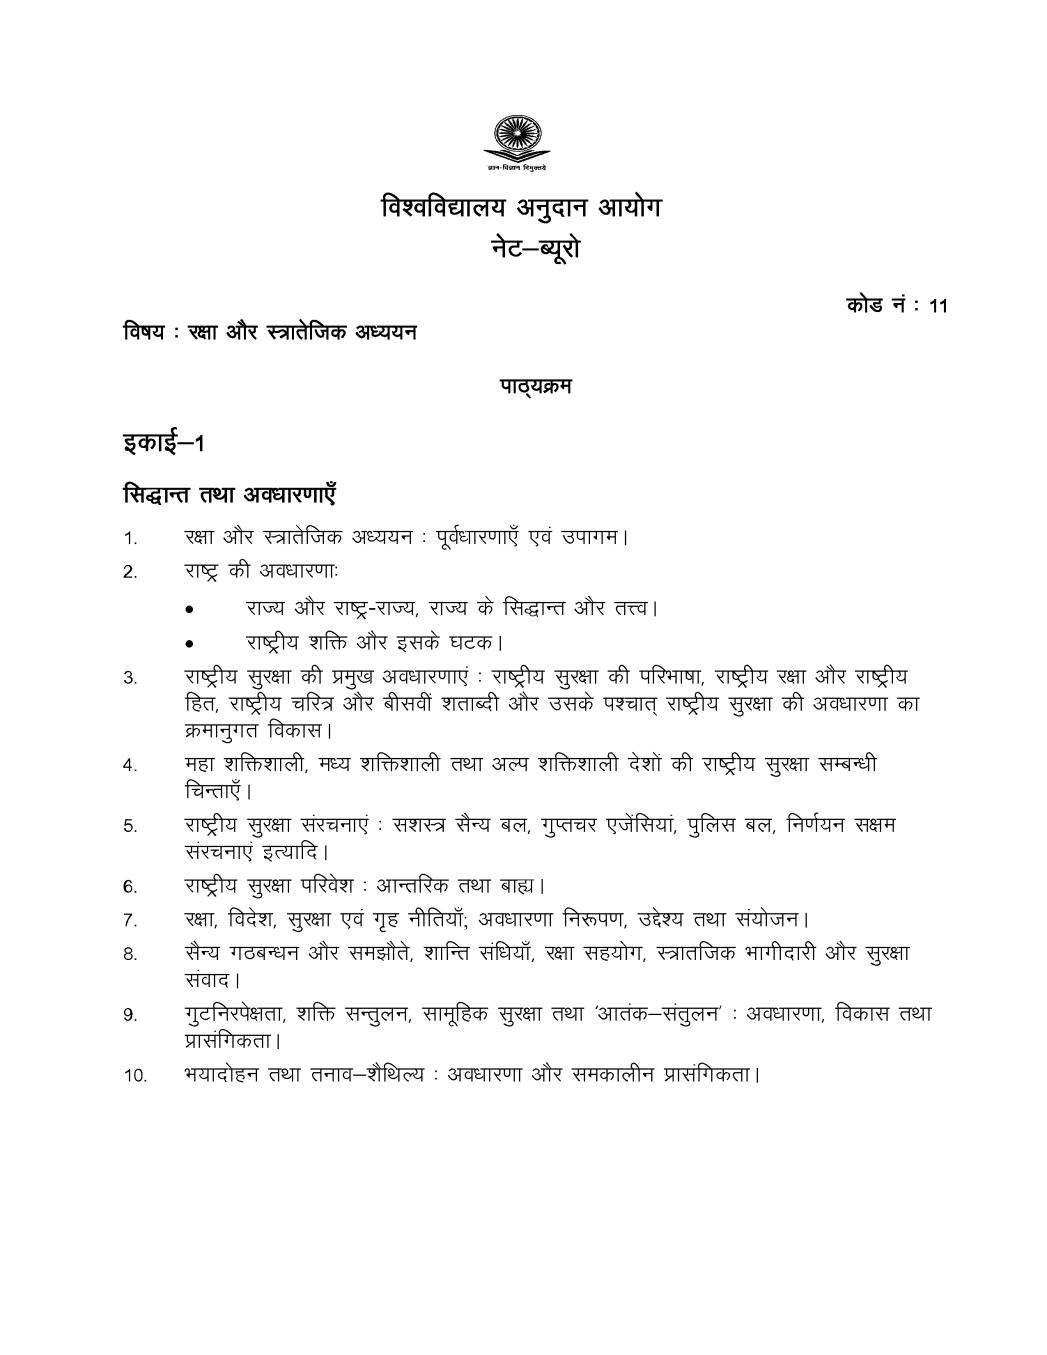 UGC NET Syllabus for Defence and Strategic Studies 2020 in Hindi - Page 1